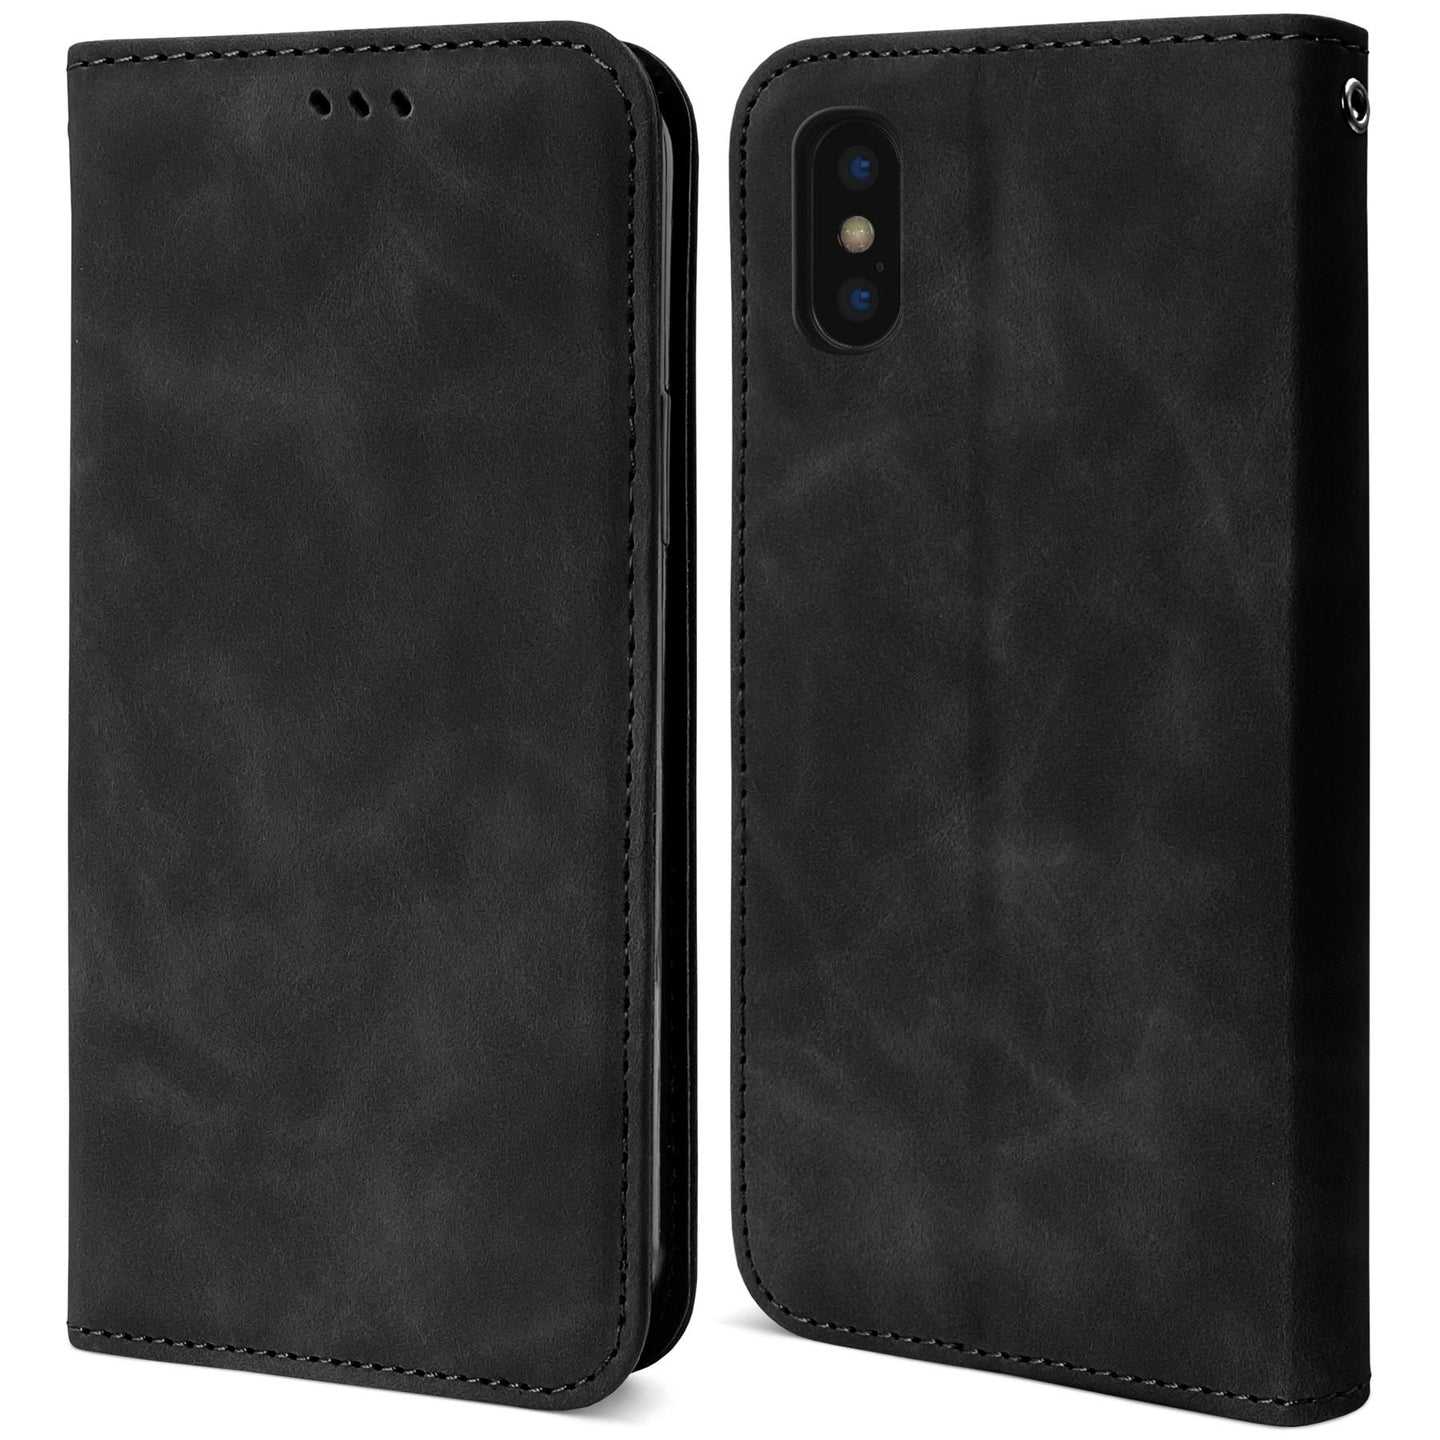 Moozy Marble Black Flip Case for iPhone X, iPhone XS - Flip Cover Magnetic Flip Folio Retro Wallet Case with Card Holder and Stand, Credit Card Slots, Kickstand Function